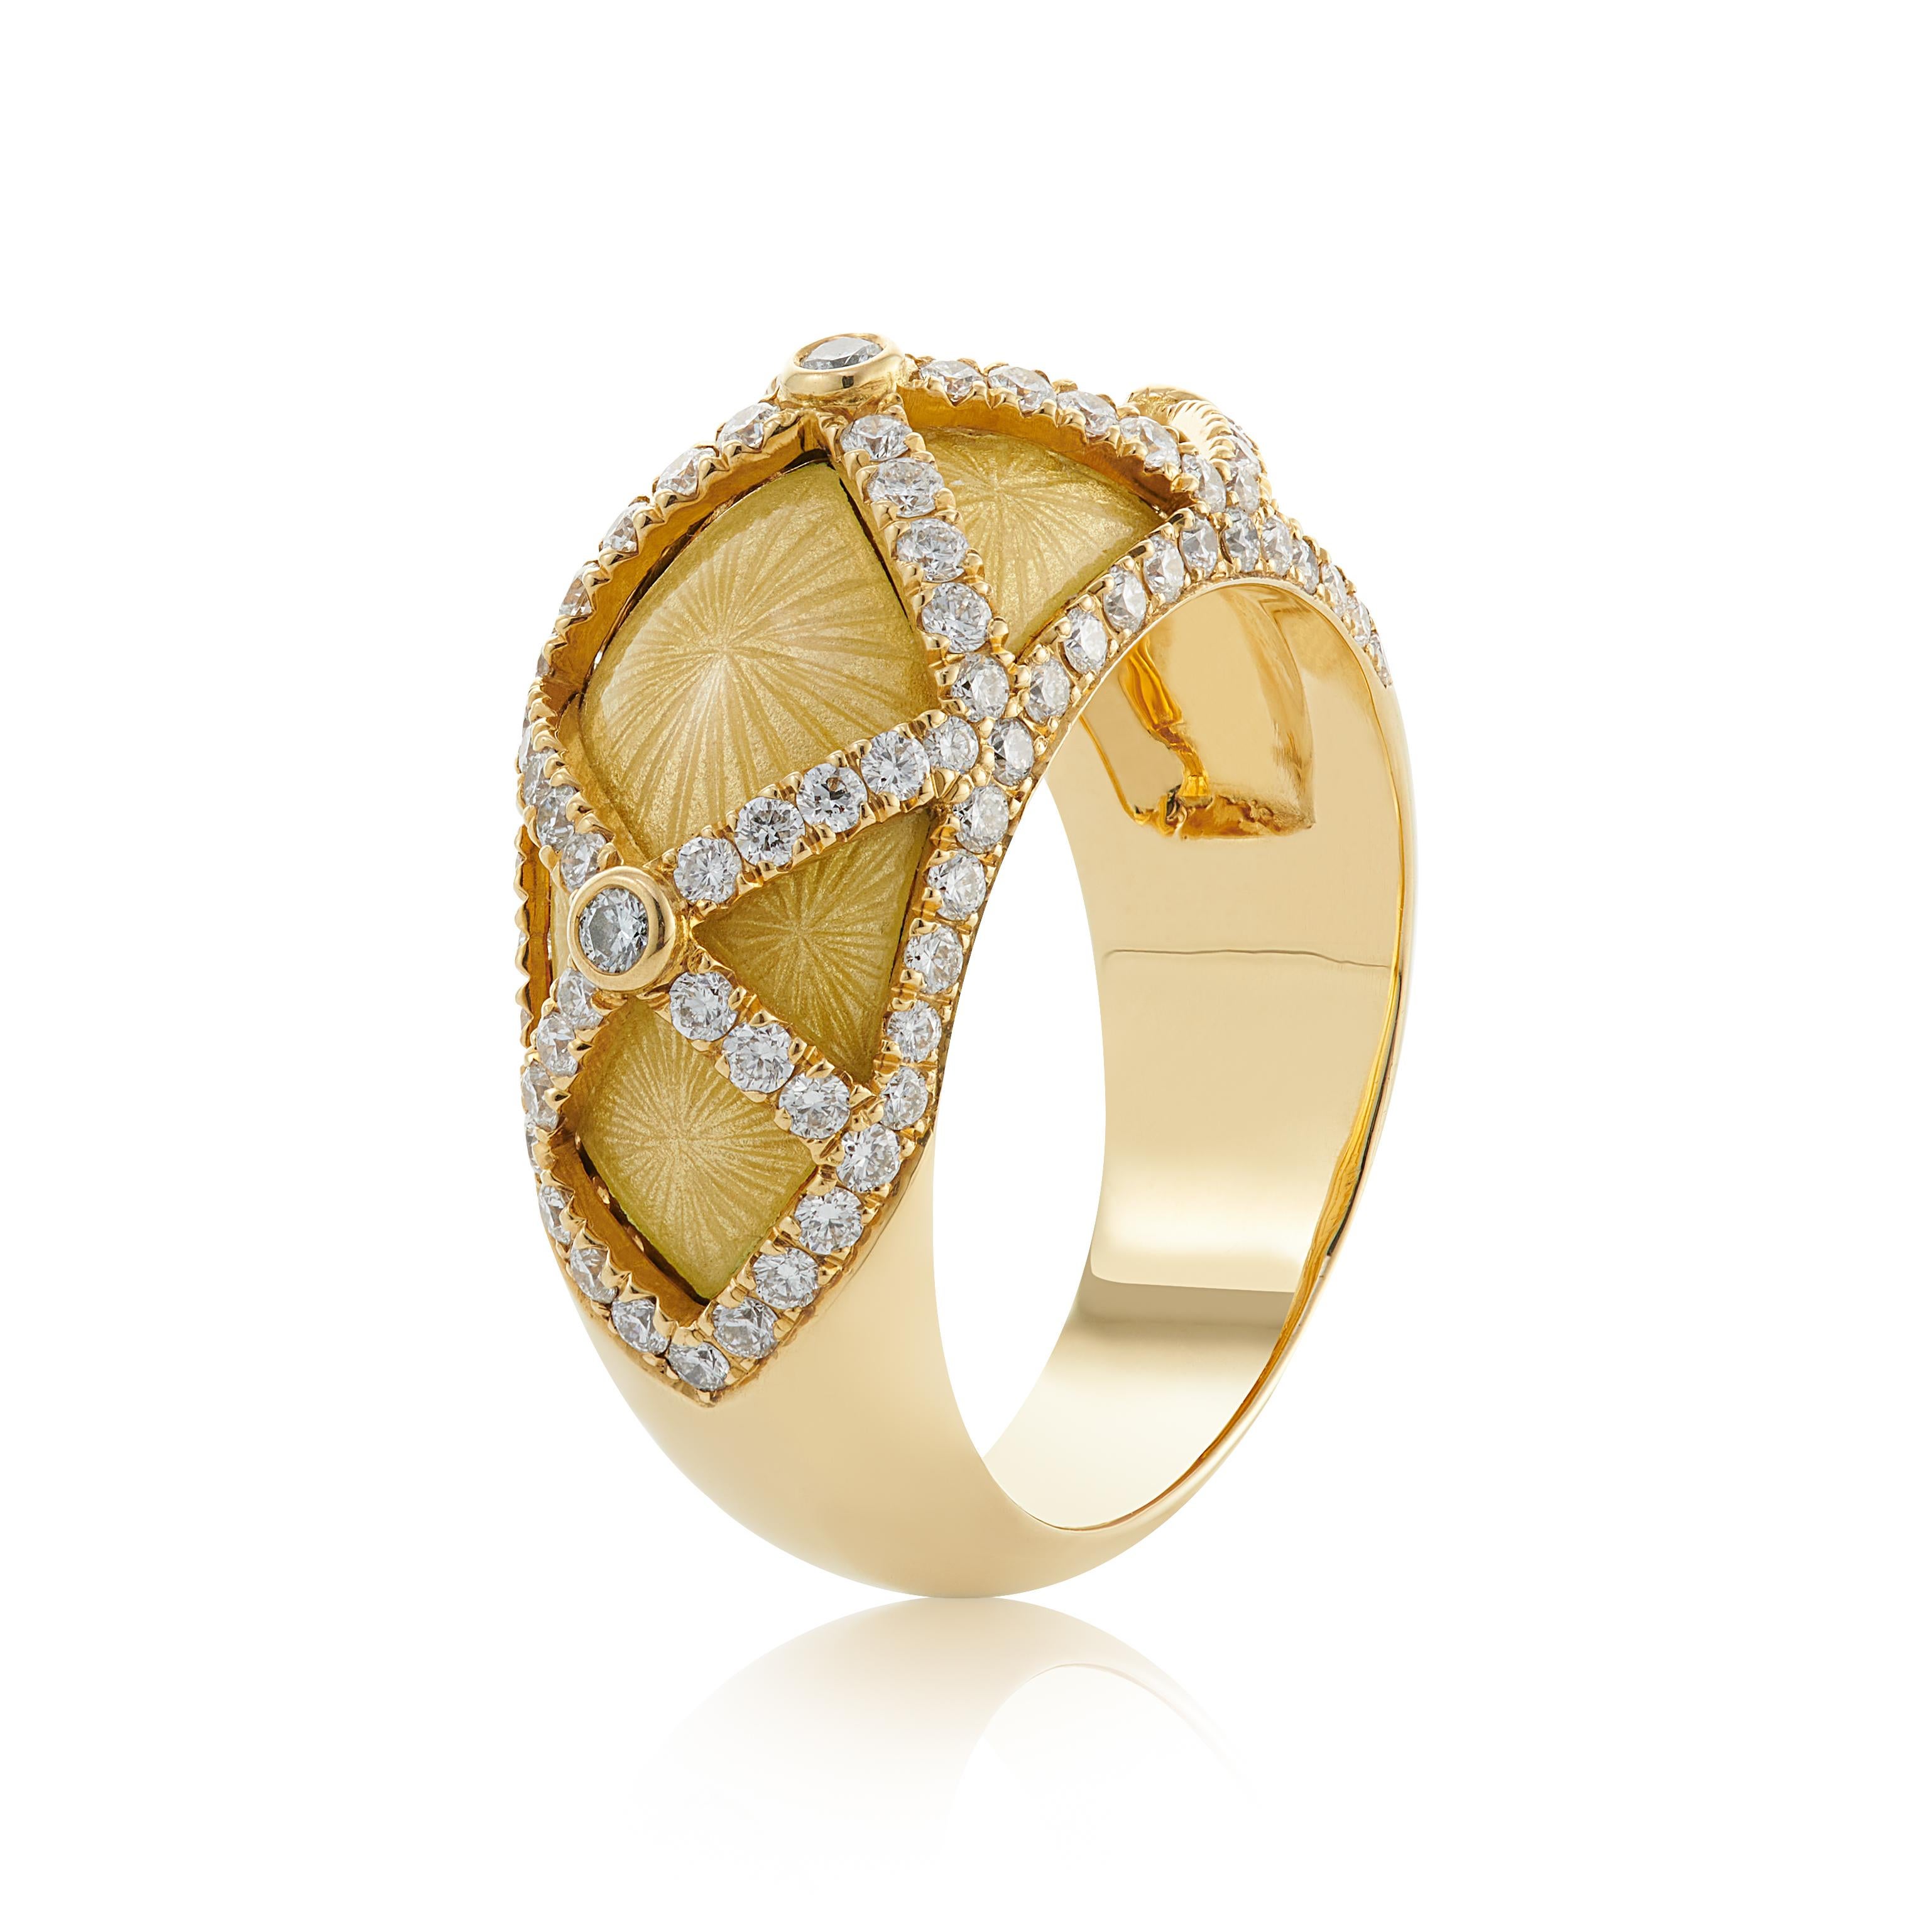 E Wolfe & Co Handmade 18 carat White Gold Yellow Enamel and Diamond Cocktail Ring. The ring has been yellow enamelled with vitreous enamel in a radiating pattern and the diamond lattice-detail applied on top of this. The diamond detail contains a